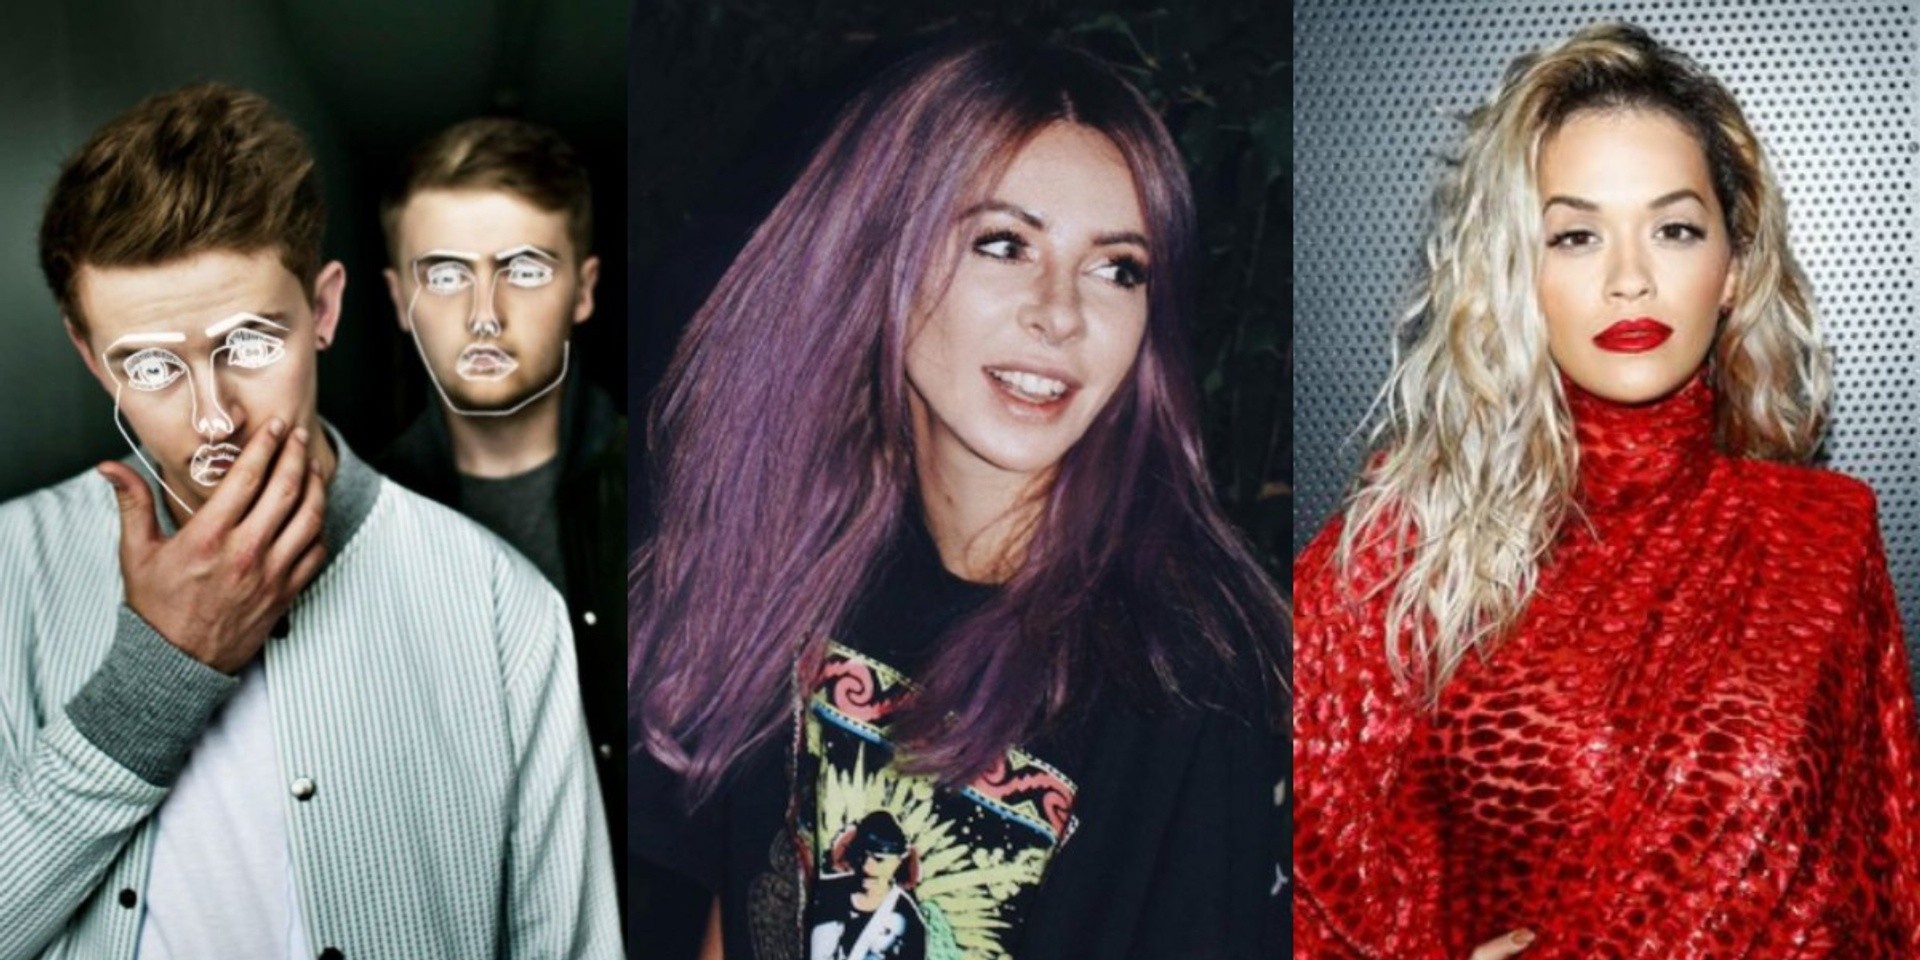 SHVR Ground Festival 2018 in Jakarta to be headlined by Alison Wonderland, Disclosure... and Rita Ora